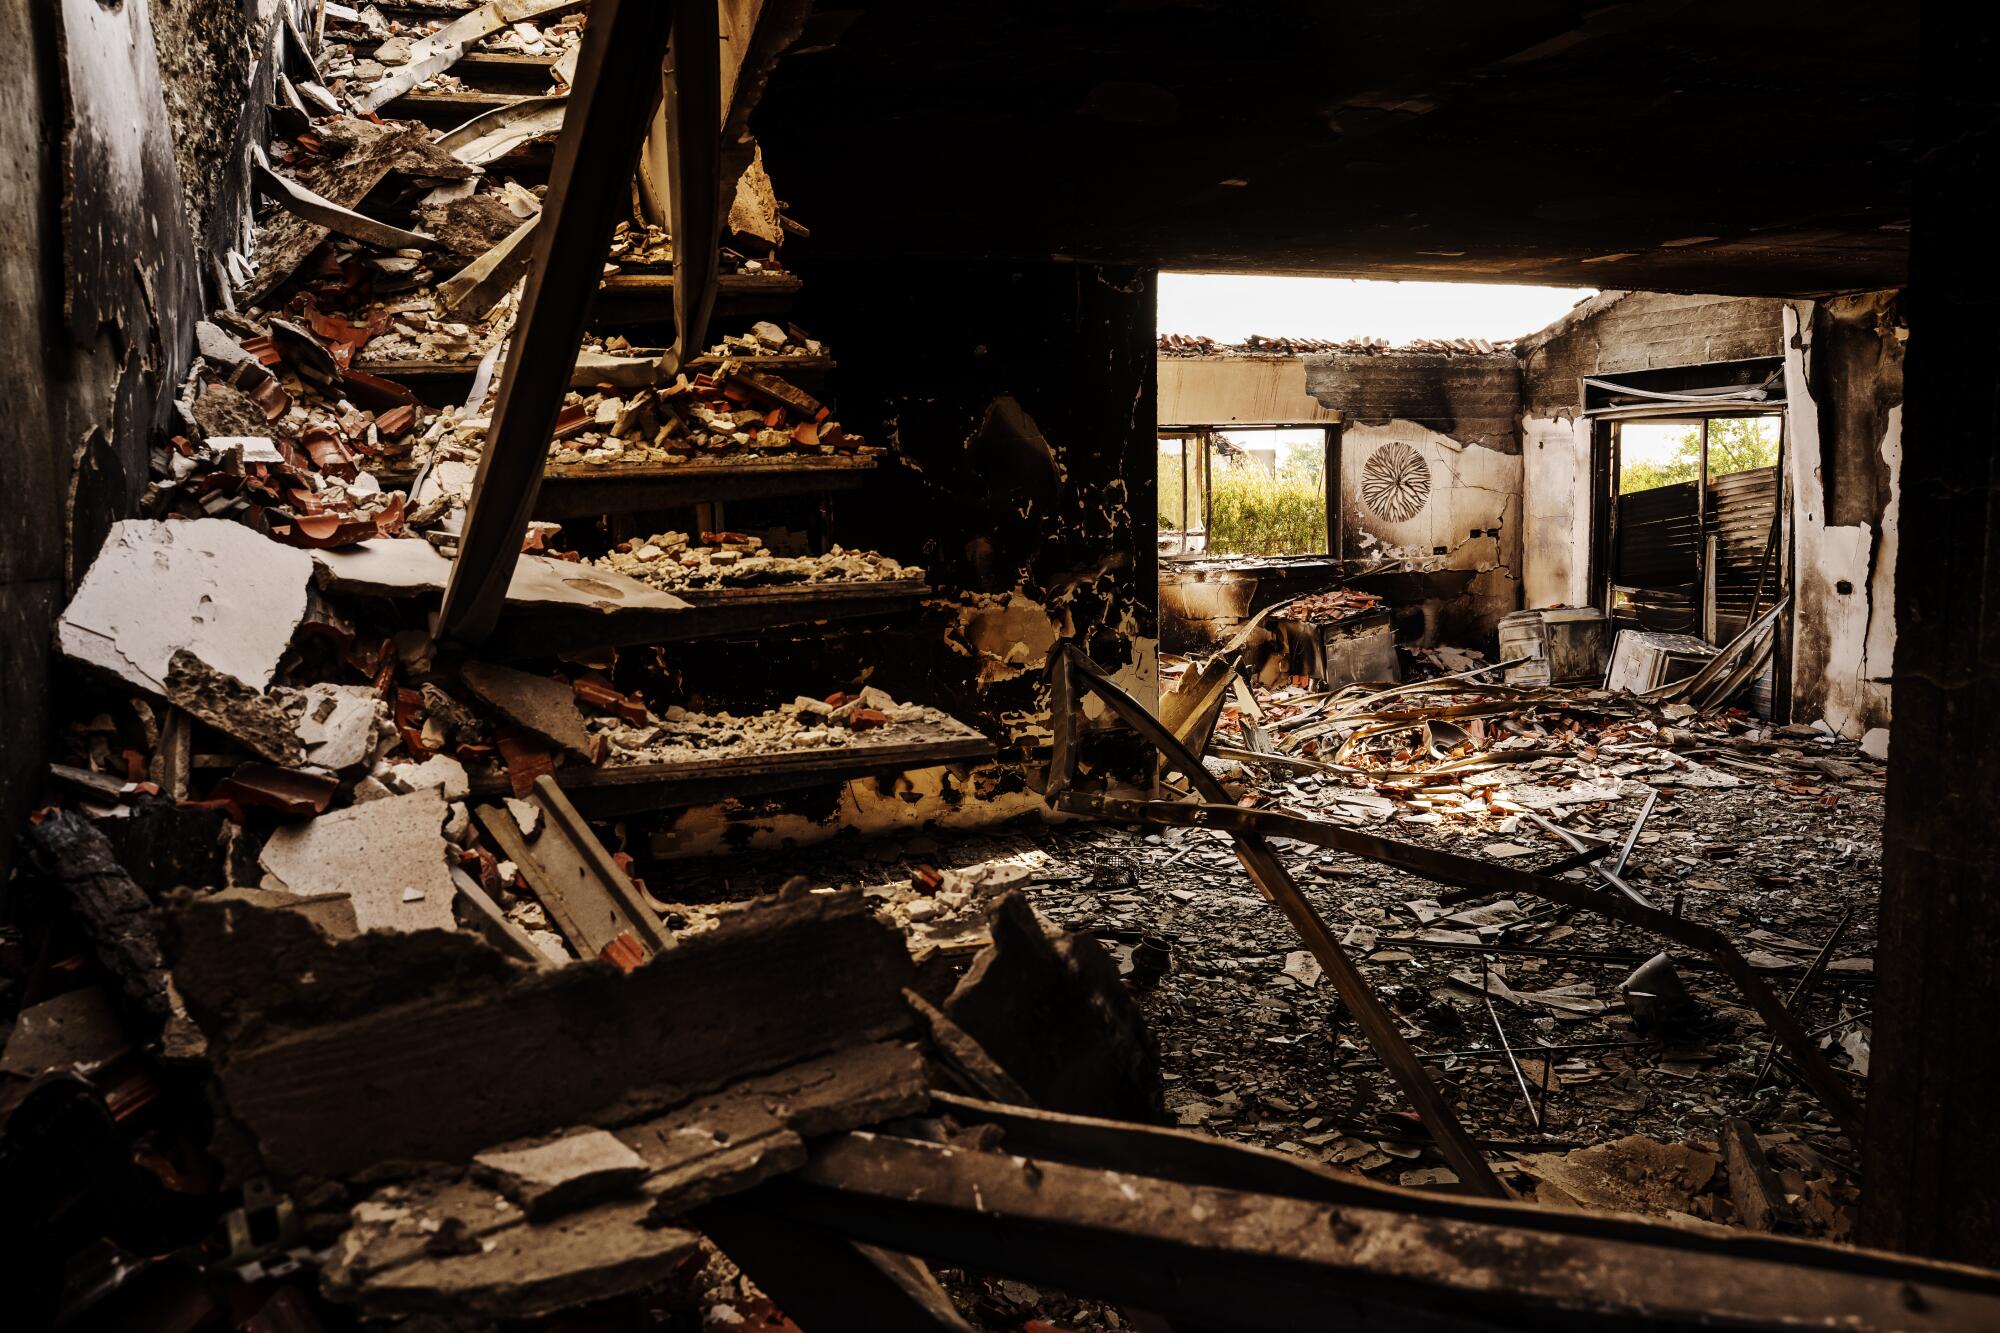 Debris covering stairs and the floor of a scorched house with roof and windows blown out